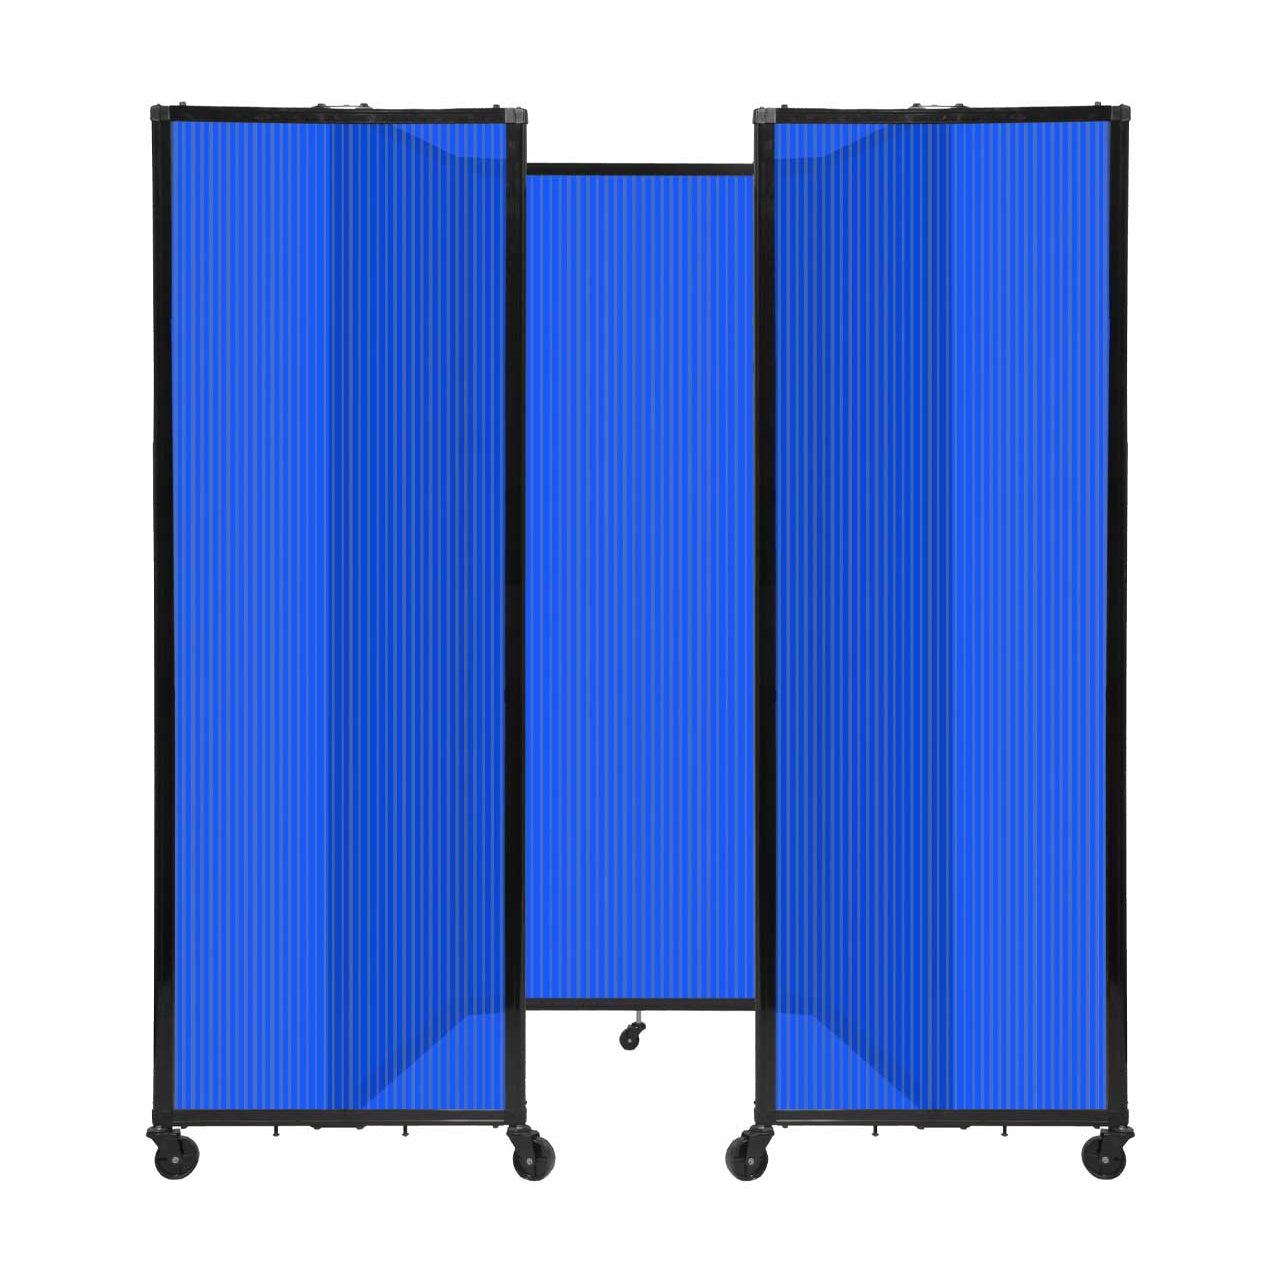 Room Divider 360° Folding Portable Partition with Fluted Polycarbonate Panels, 8' 6" W x 6' 10" H